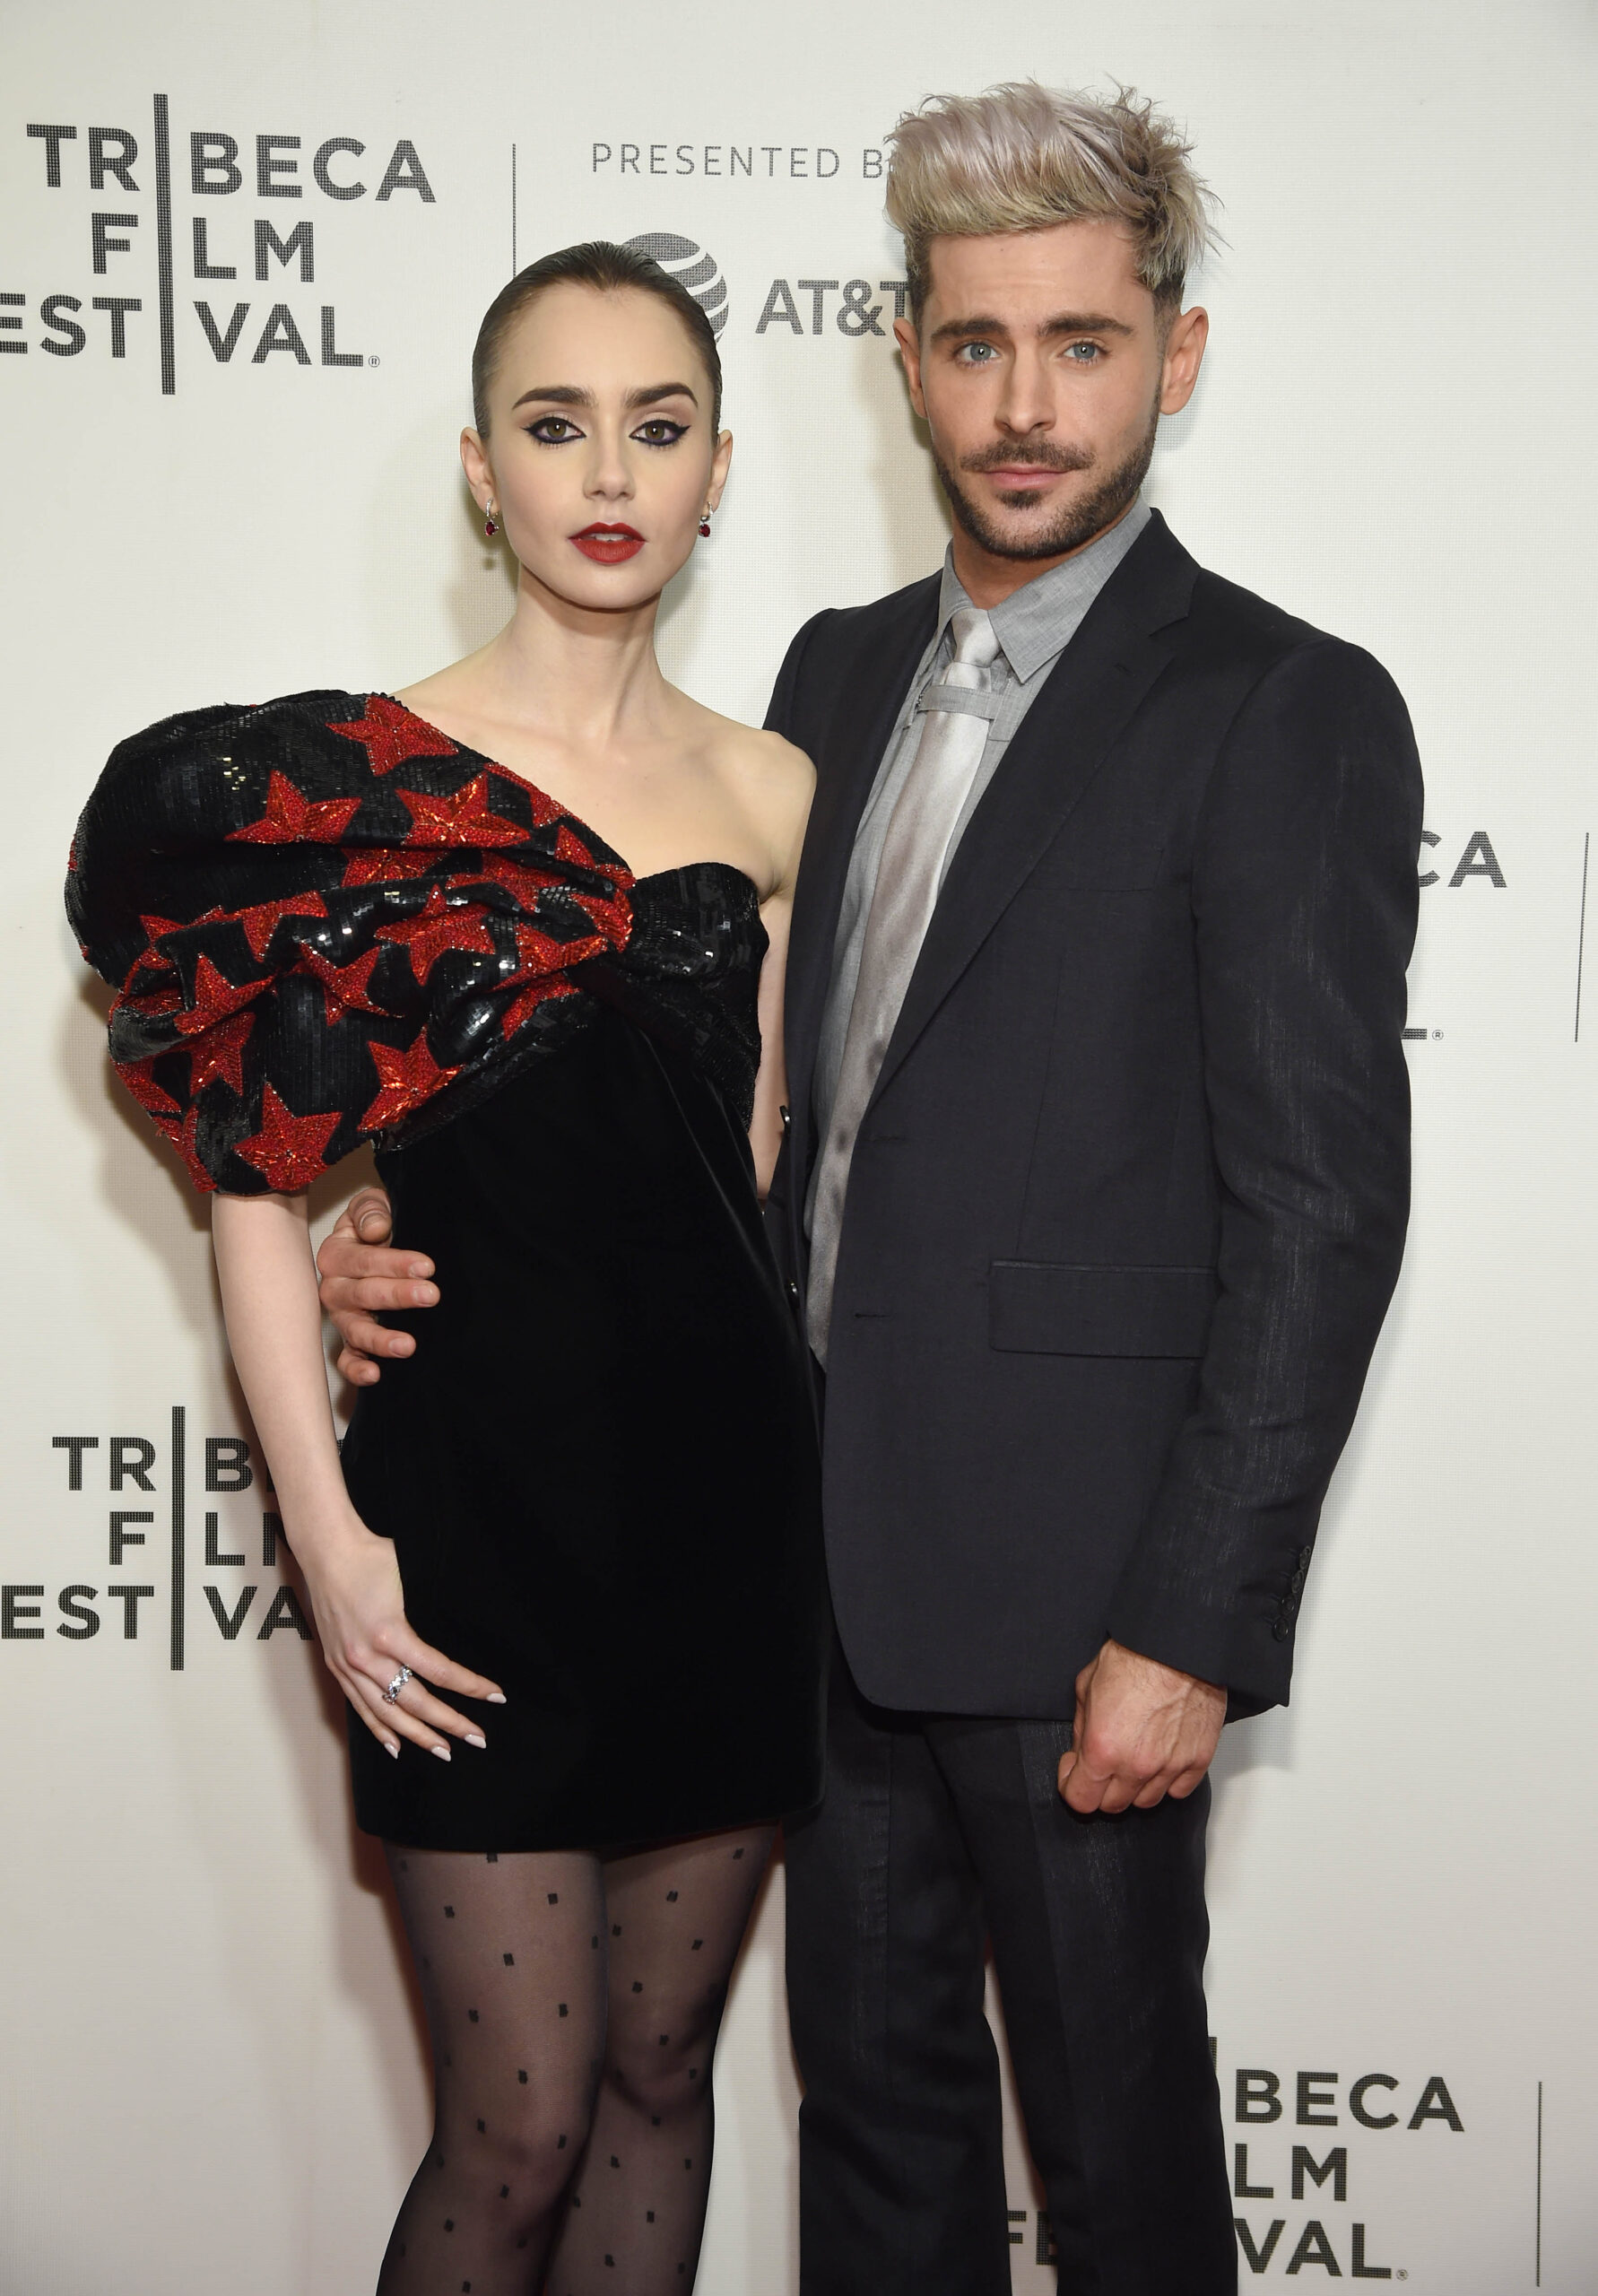 Zac Efron and Lily Collins